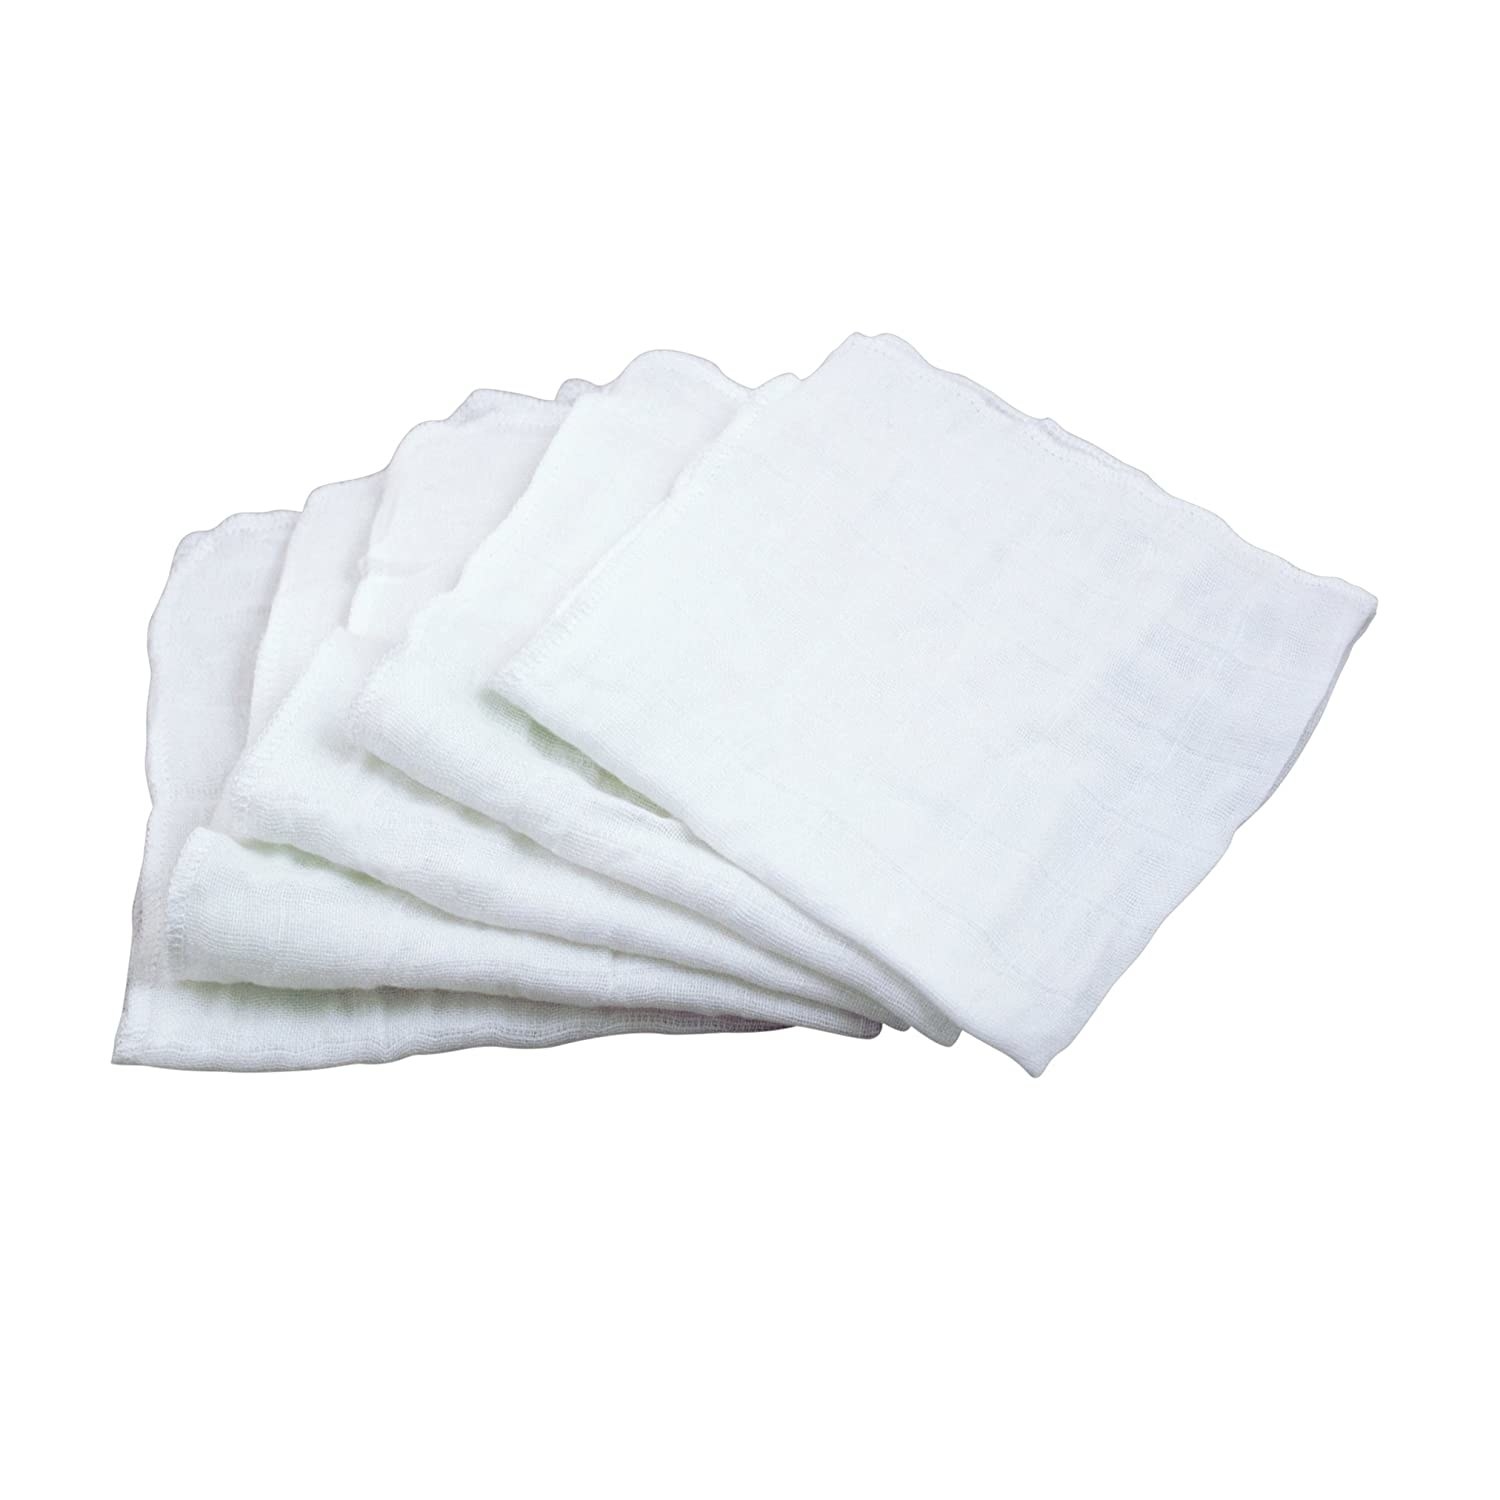 five muslin cloths in a stack